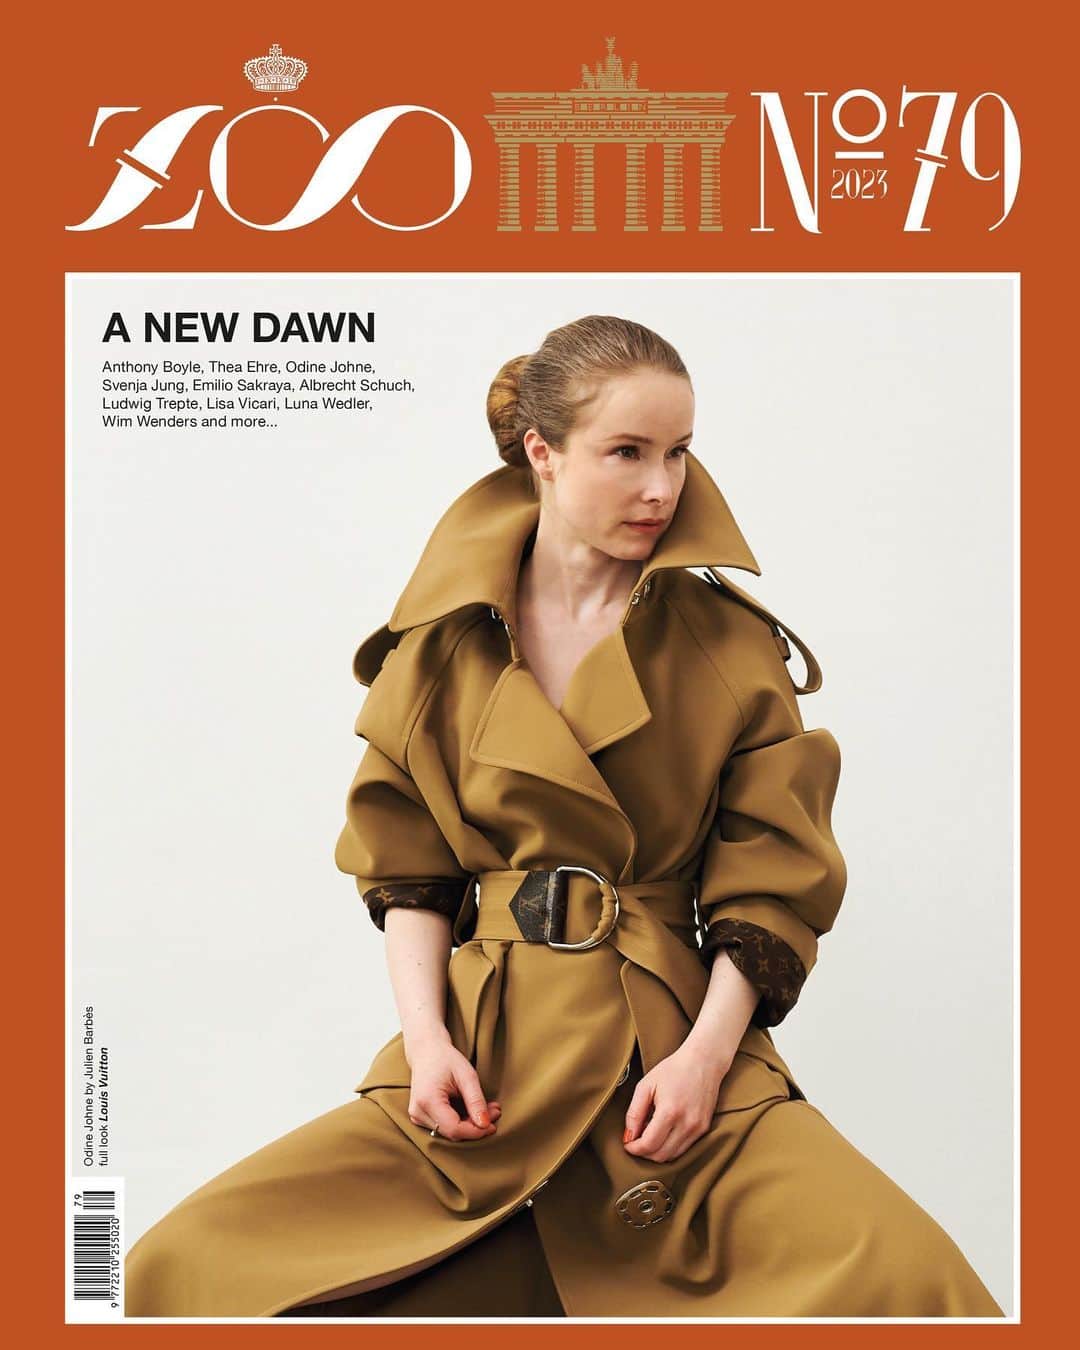 ZOO Magazineさんのインスタグラム写真 - (ZOO MagazineInstagram)「ZOO MAGAZINE ISSUE #79: A NEW DAWN  Odine Johne by Julien Barbès Shot and interviewed exclusively for ZOO MAGAZINE - 20 YEARS   Odine wears: Full look Louis Vuitton @louisvuitton  A veteran of the German entertainment field – film and theater actress, and writer – Odine Johne sits down with ZOO to discuss her professional journey, critically reflect on the German film industry as a social institution, and express her hopes for the future. Having been exposed to the industry at an early age, Odine reminisces on her earliest forays into acting and the challenges she encountered therein. Providing sociopolitical commentary on what it really means to be an actress in our day and age, Johne does not hold back, timidity is not on her agenda.  Despite her palpable passion for acting, Odine is not afraid to highlight the darker sides of the industry, from its hierarchical organizational structures to narrow female representations and extreme working conditions. Beyond such practical considerations, Odine also reflects on the positionality and responsibility of German entertainment as it pertains to political and social causes. She seamlessly weaves past experiences with her current projects and future ambitions, providing a highly personal insight into her creative processes while retaining a confident intellectual perspective on the broader themes and practices which, in her eyes, offer true value to the filmmaking experience.  Photographer: Julien Barbès @studiojulienbarbes Talent: Odine Johne @odinejohne  Stylist: Camille Franke @camille.franke Hair and Makeup: Andreas Bernhardt @andreashbernhardt @basics.berlin Location: Studio Batterie @studiobatterie Stylist’s Assistants: Antonio Chiocca and Johanna Rill @antoniochiocca_stylist @rilljohanna  Interview: Anne Sophie Kimpel @annesophiekimpel Production: ZOO MAGAZINE   #ZOO79 #ZooMagazine #SandorLubbe #photography #fashionphotography #cinema #louisvuitton #JulienBarbes #OdineJohne #anewdawn  #20YEARSZOOMAGAZINE」6月22日 1時35分 - zoomagazine